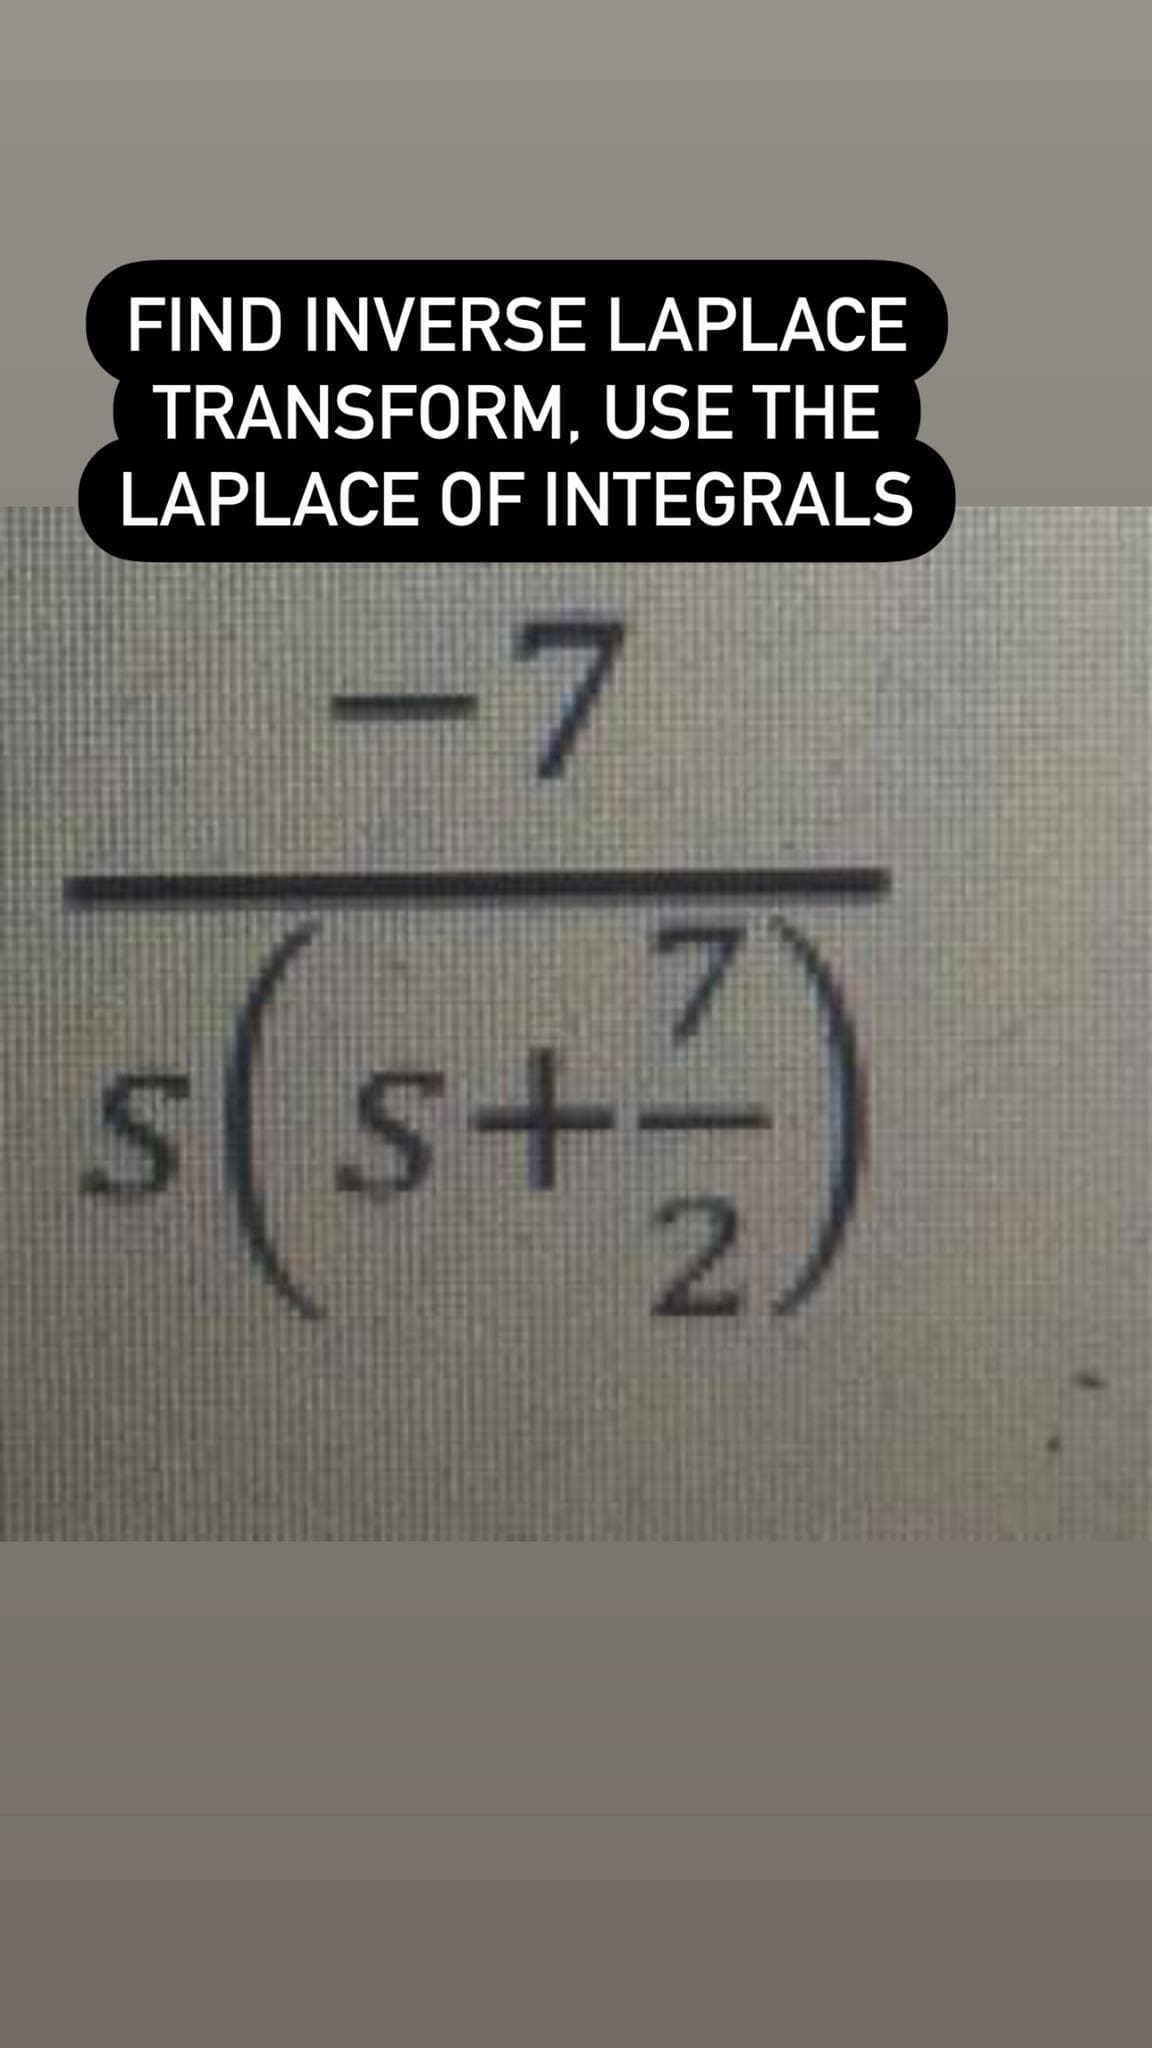 FIND INVERSE LAPLACE
TRANSFORM, USE THE
LAPLACE OF INTEGRALS
-7
SS+-
2.
